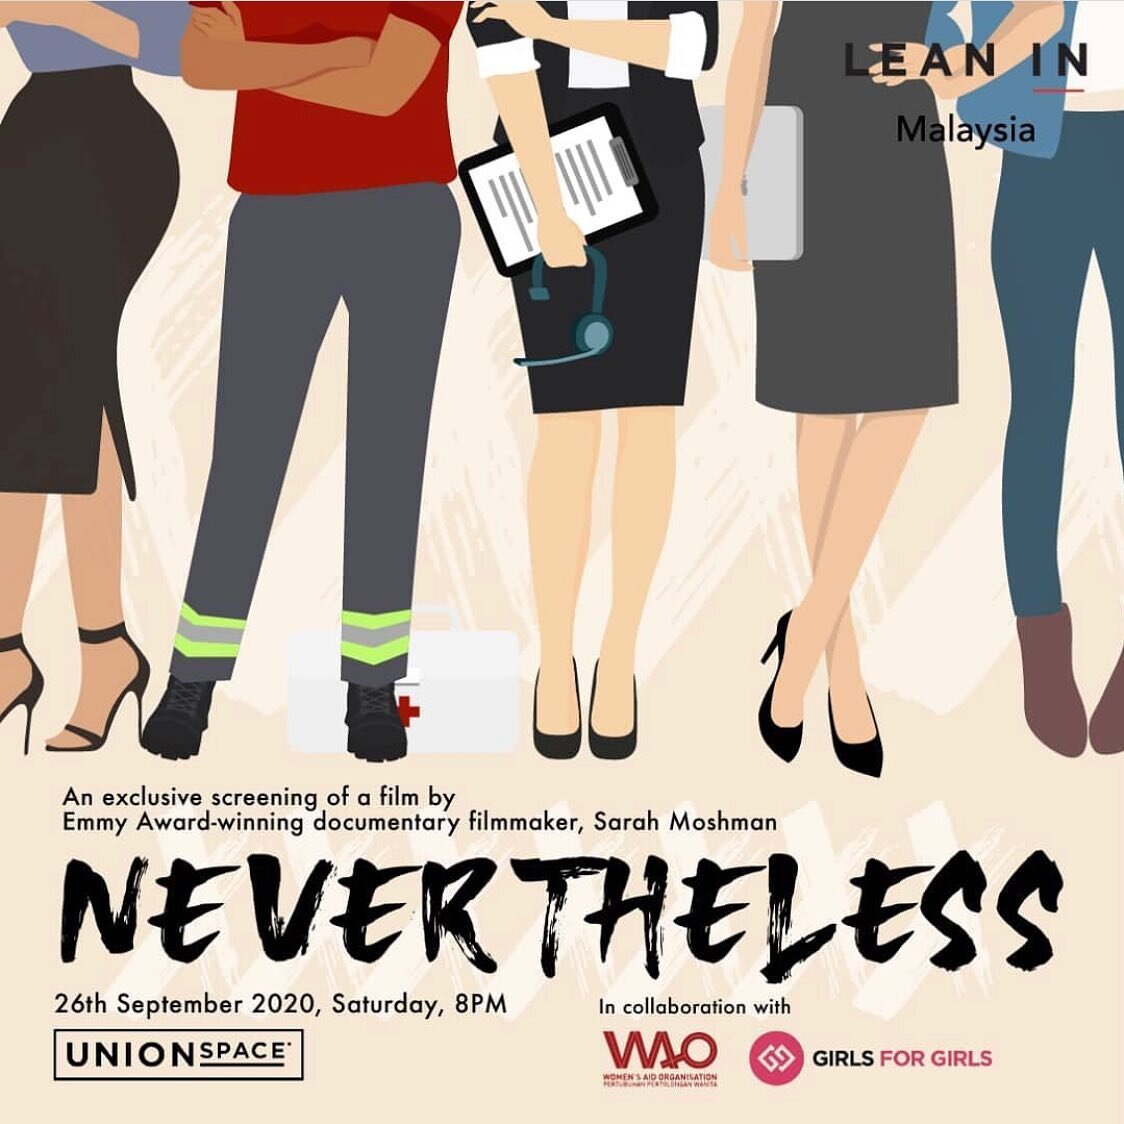 Excited for our first screening in Malaysia coming up on September 26th hosted by @leaninmalaysia 👏 and thanks to @sarahchenglobal for organizing! #nevertheless #metoo #timesup #leanin